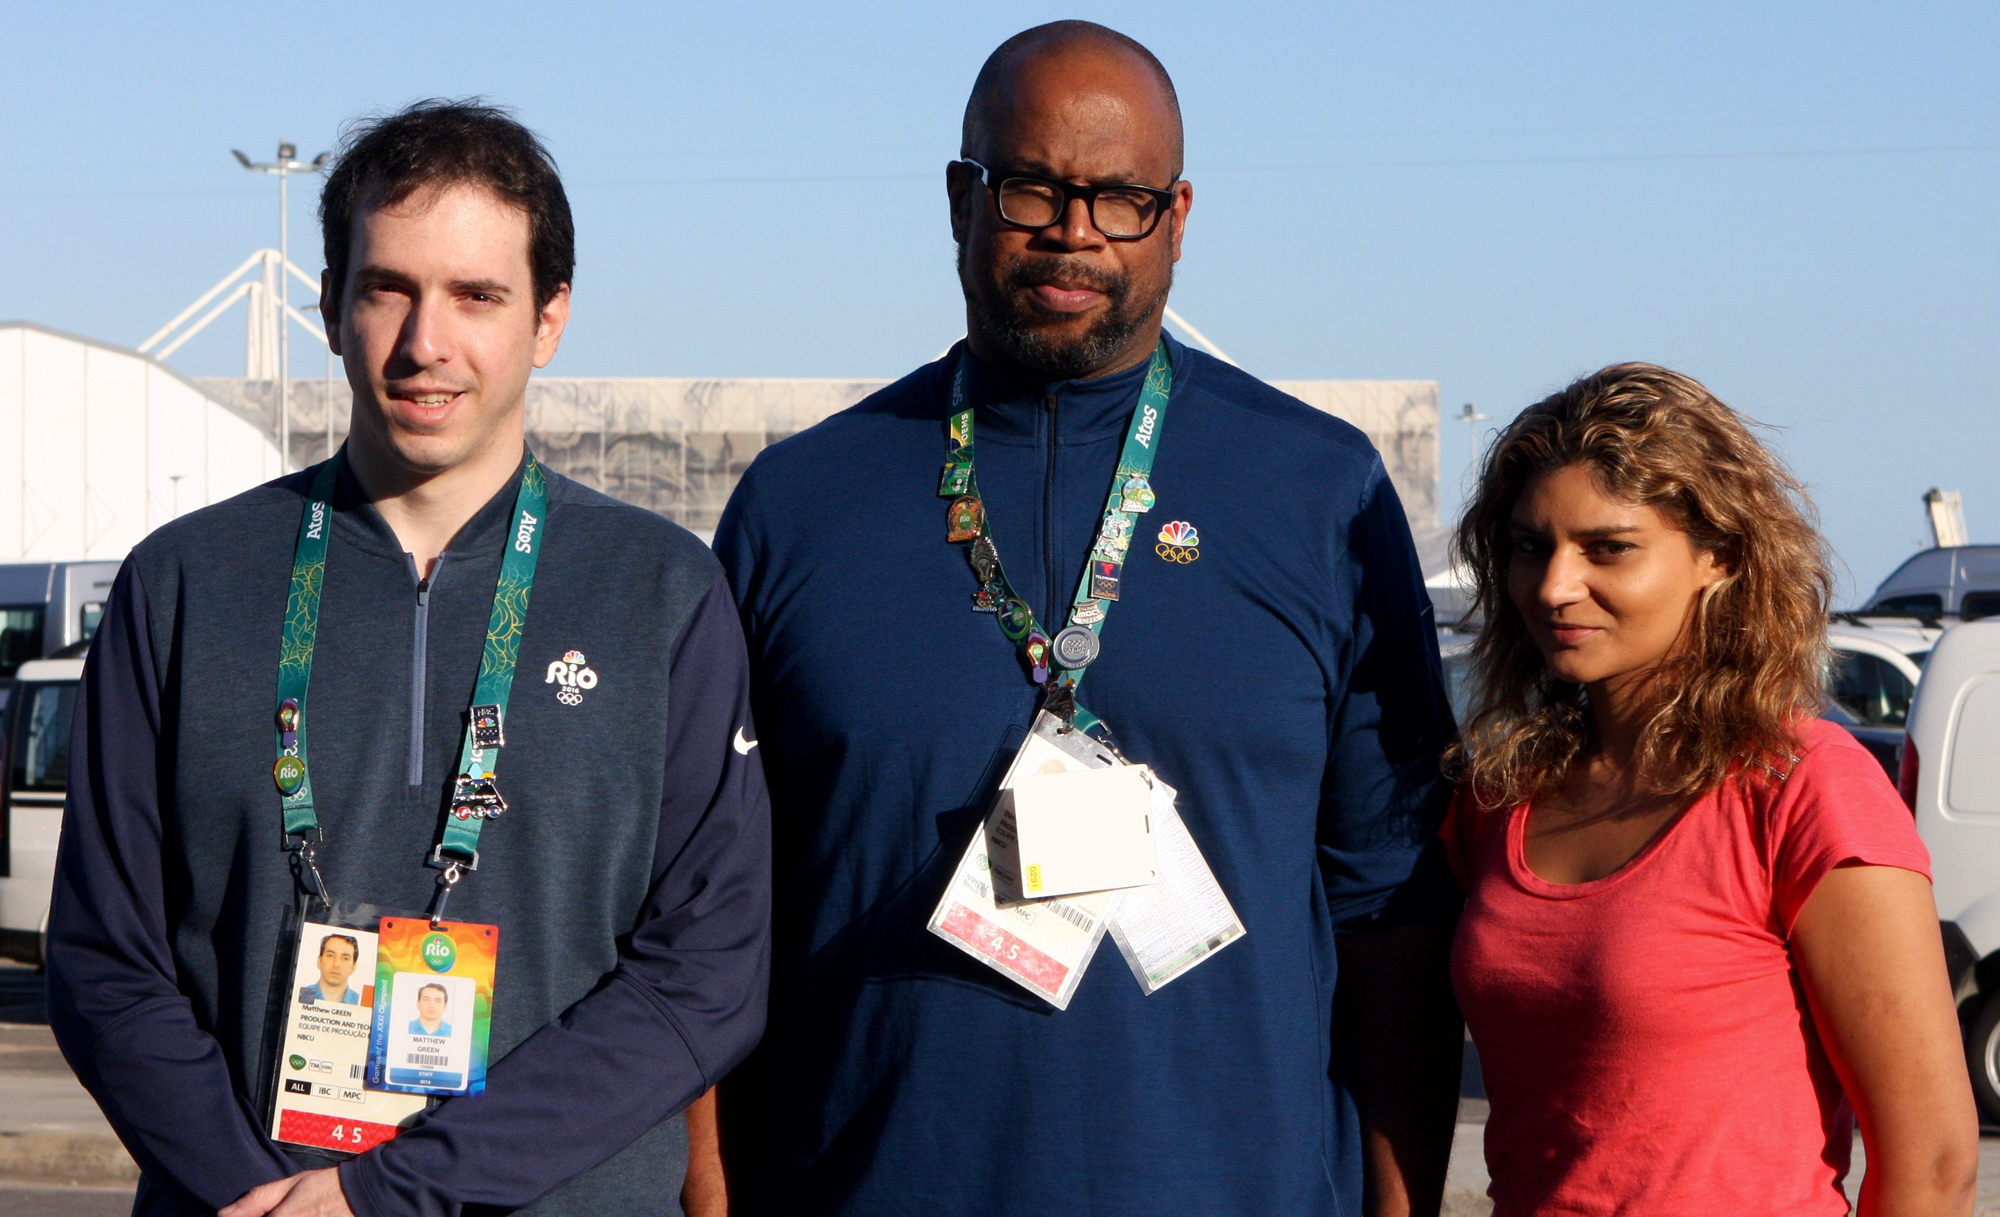 From left: Senior Digital Media Manager Matthew Green, VP, Post Operations & Digital Workflow Darryl Jefferson, Engineer, Digital Workflows Kamal Bhangle have played key roles in NBC Olympics' content management infrastructure for these Rio Games.